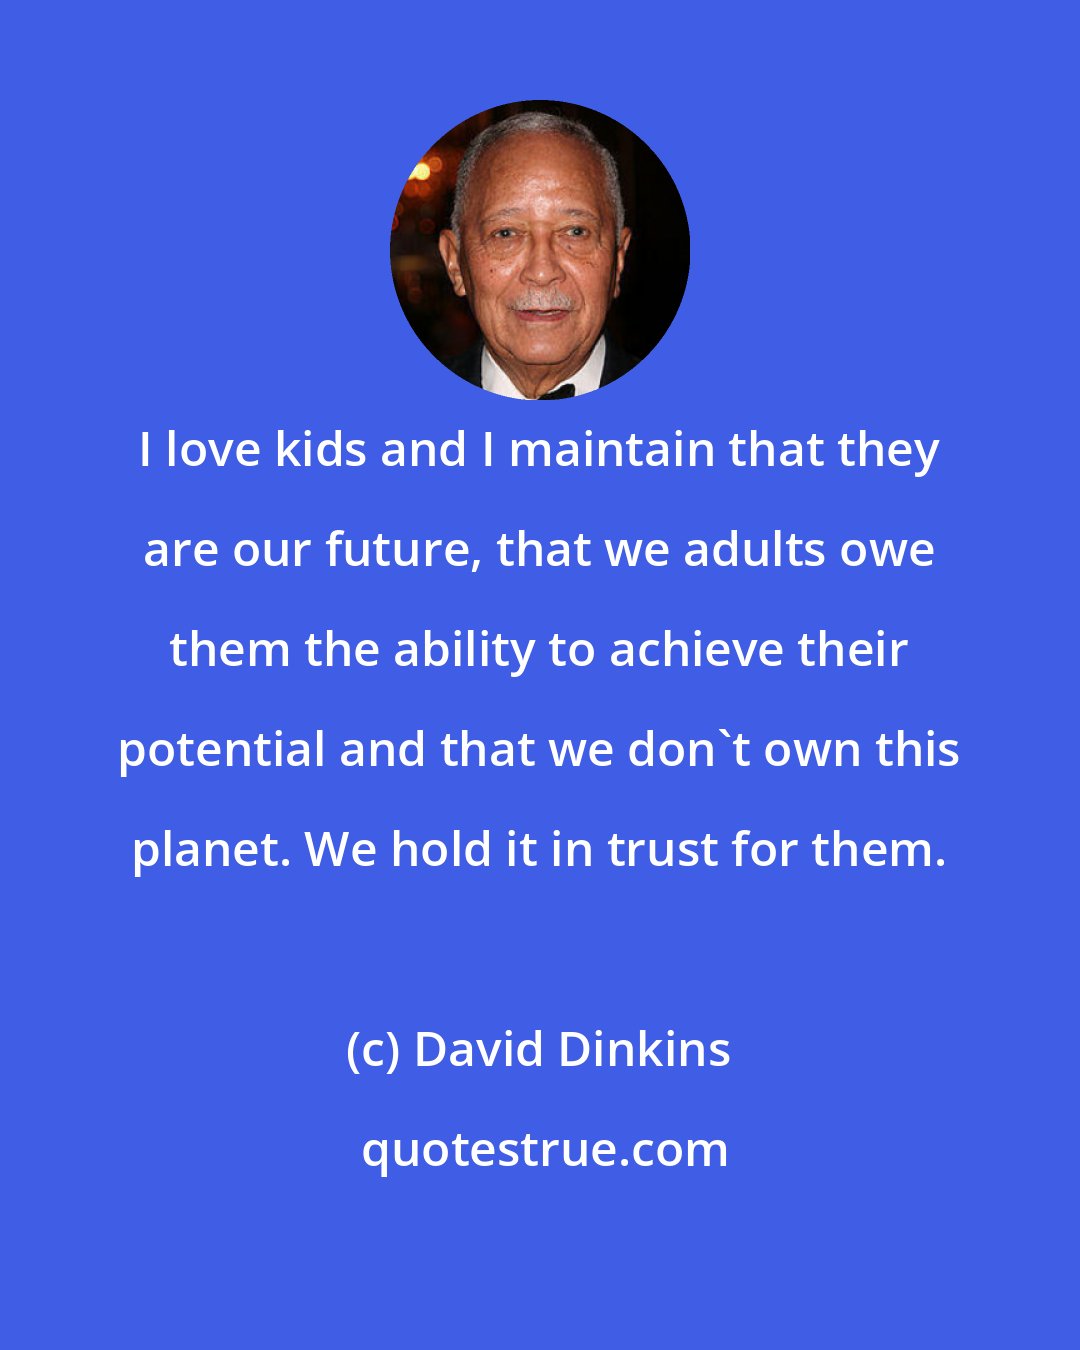 David Dinkins: I love kids and I maintain that they are our future, that we adults owe them the ability to achieve their potential and that we don't own this planet. We hold it in trust for them.